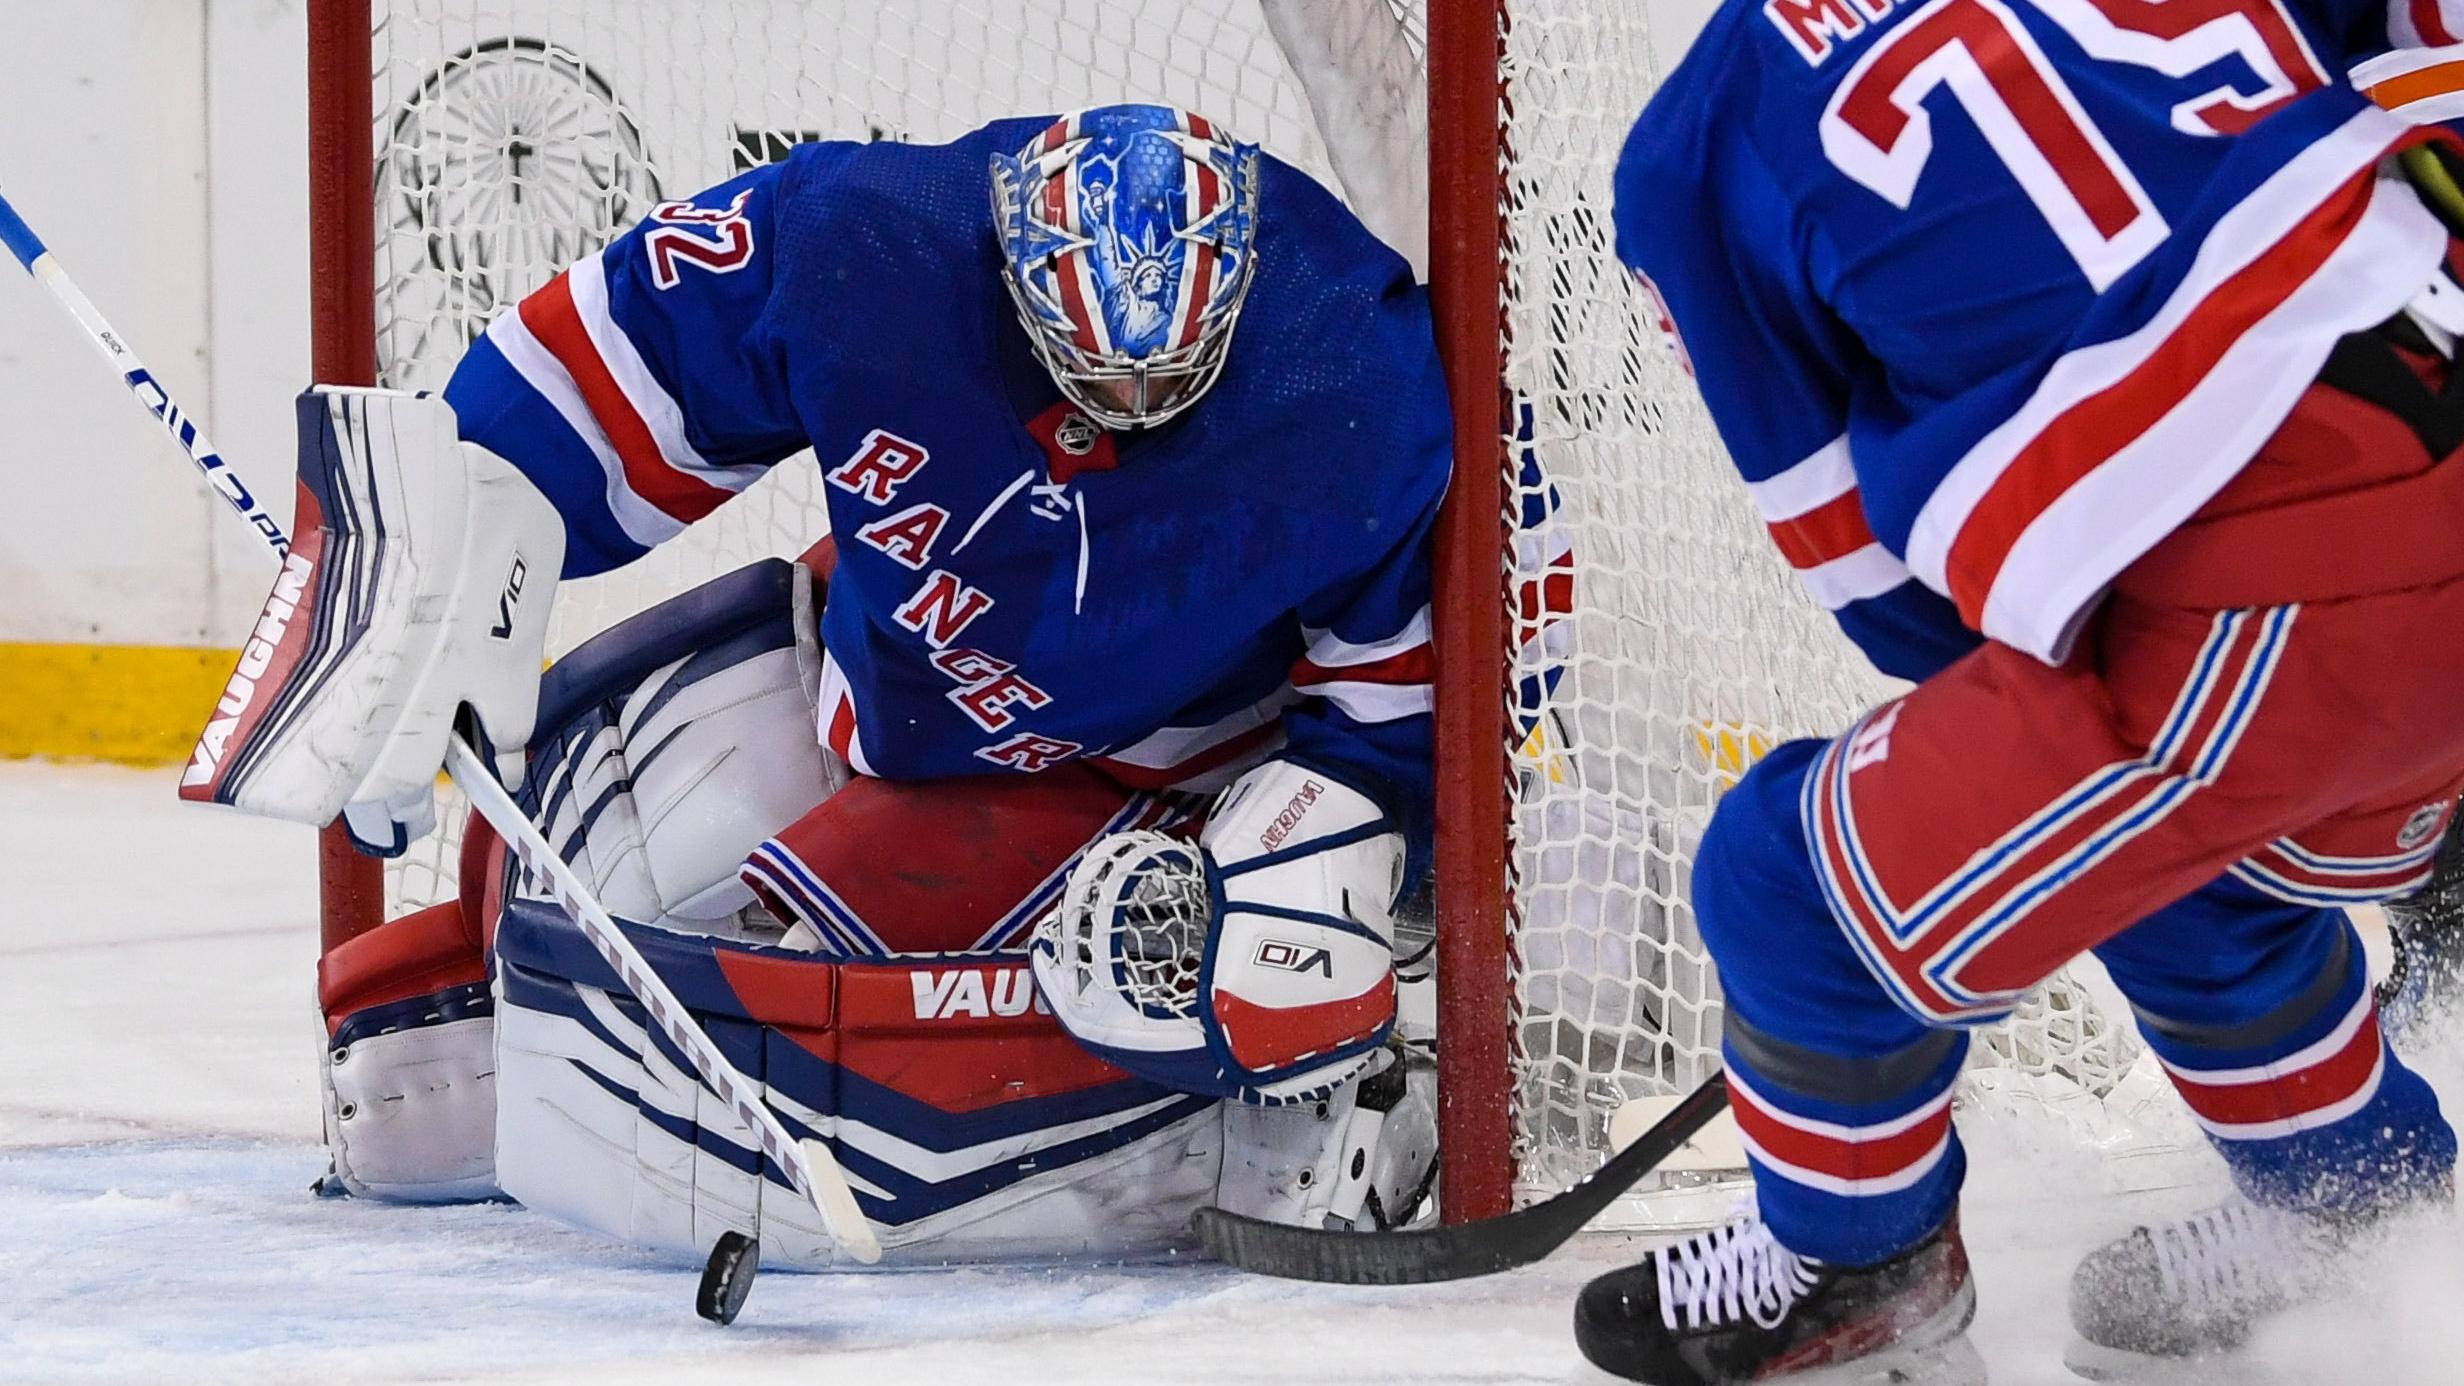 New York Rangers goaltender Jonathan Quick (32) makes a save against the Edmonton Oilers during the first period at Madison Square Garden / Dennis Schneidler - USA TODAY Sports